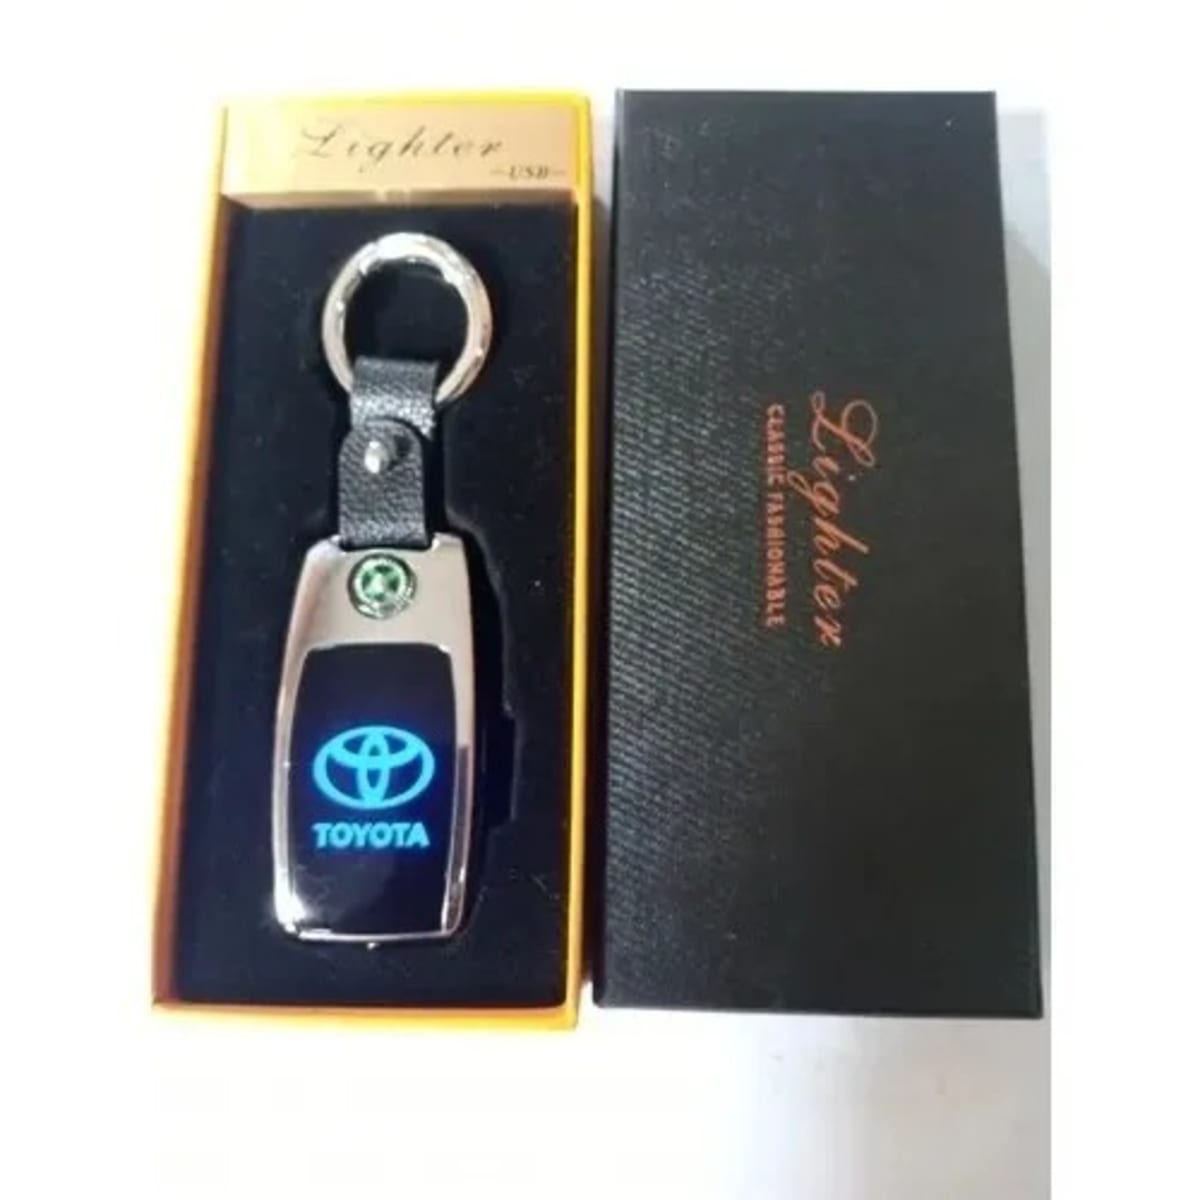 Car Key Holder With Toyota Logo And Cigarettes Lighter